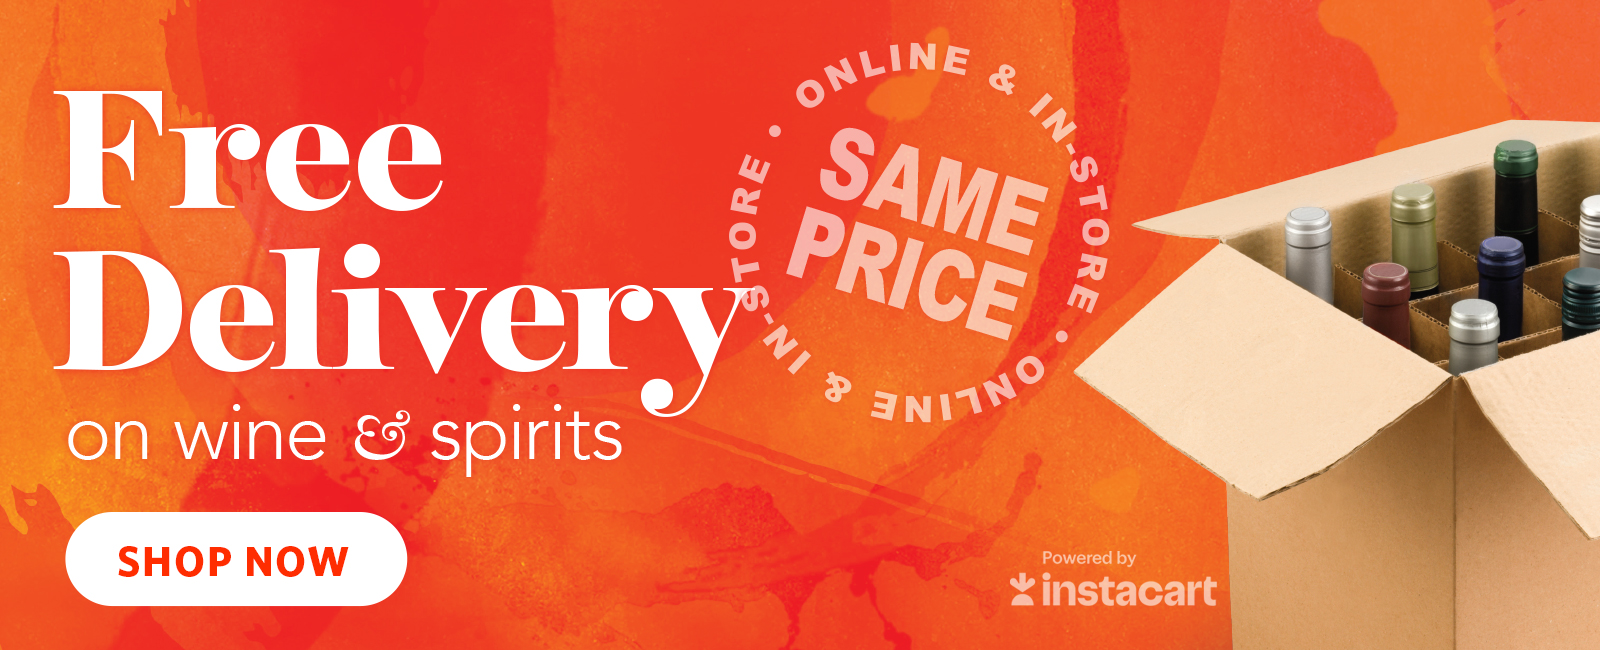 Free Delivery on Wine & Spirits - Same Price Online & In-Store - Shop Now